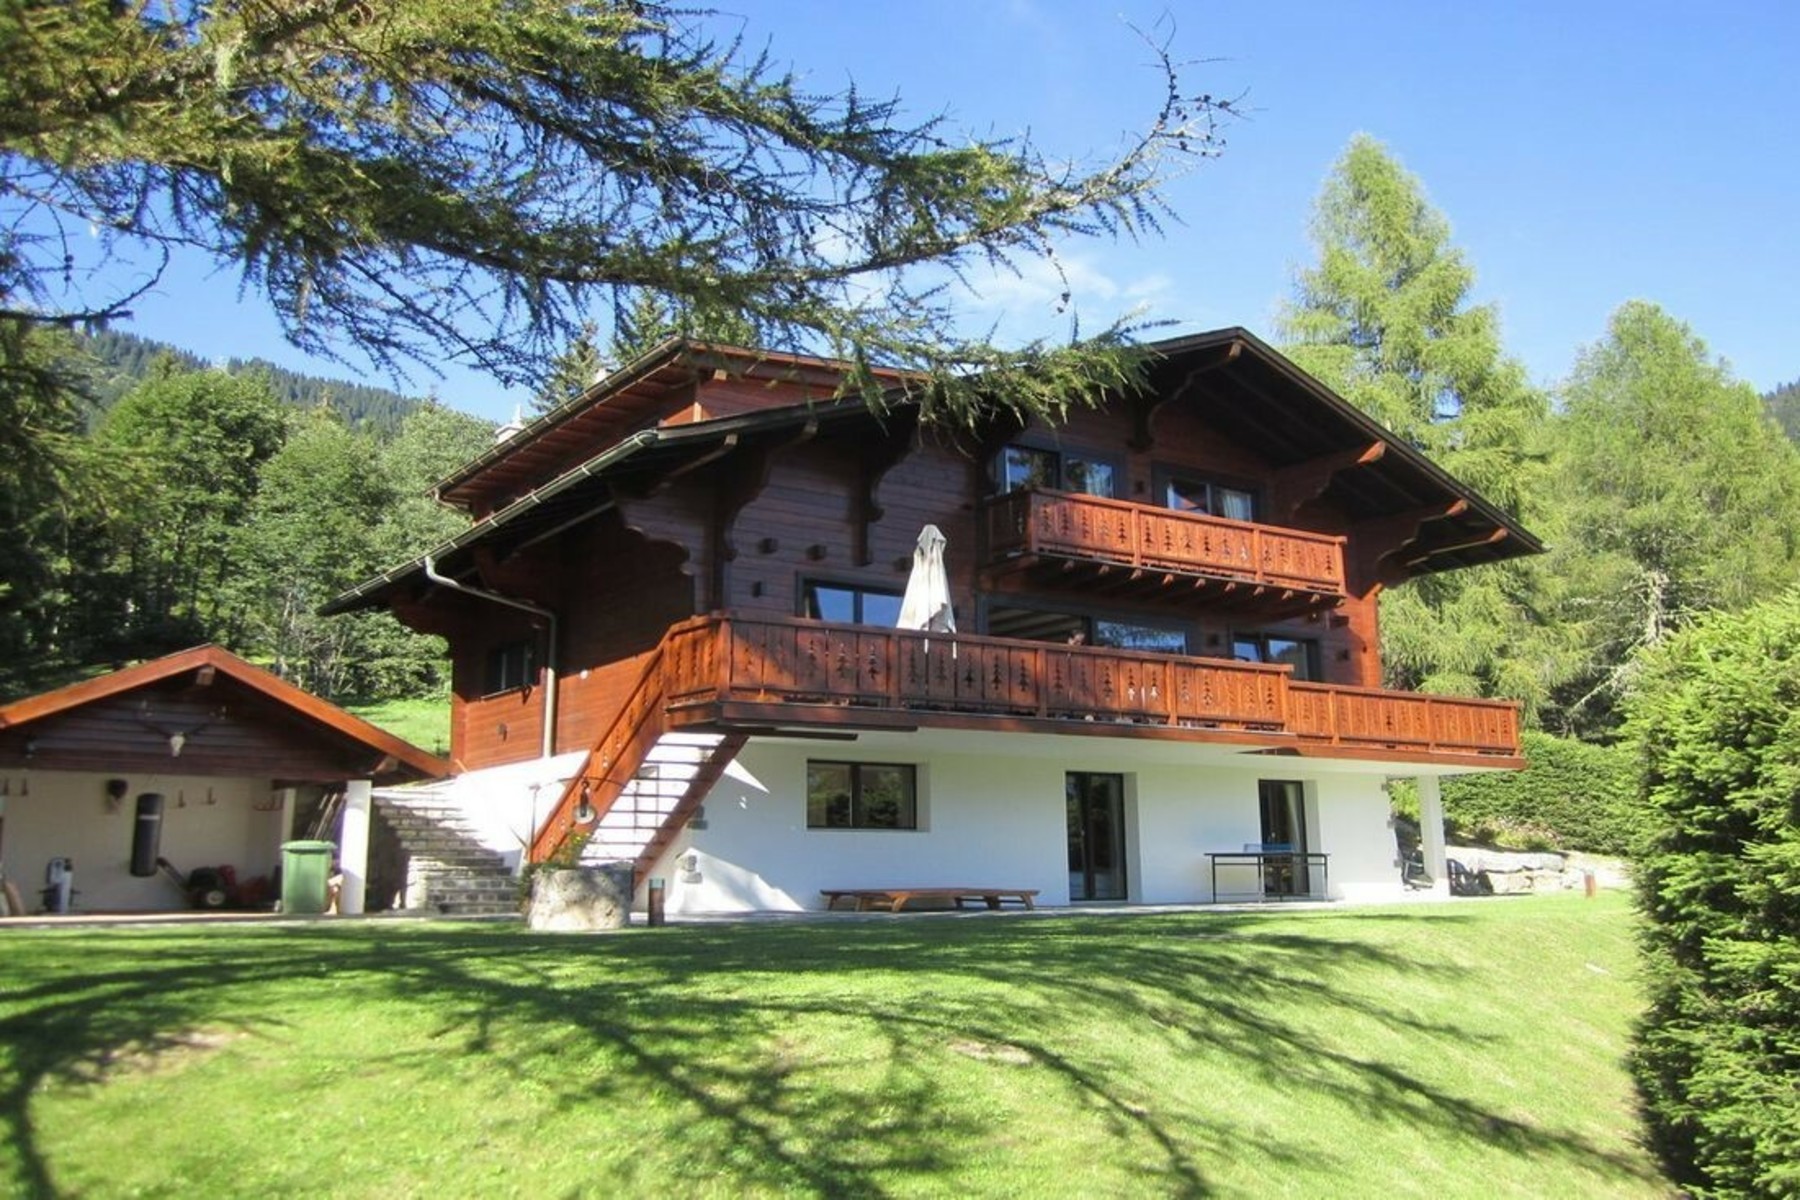 Chalet Melchior in the heart of Domaine de la Residence